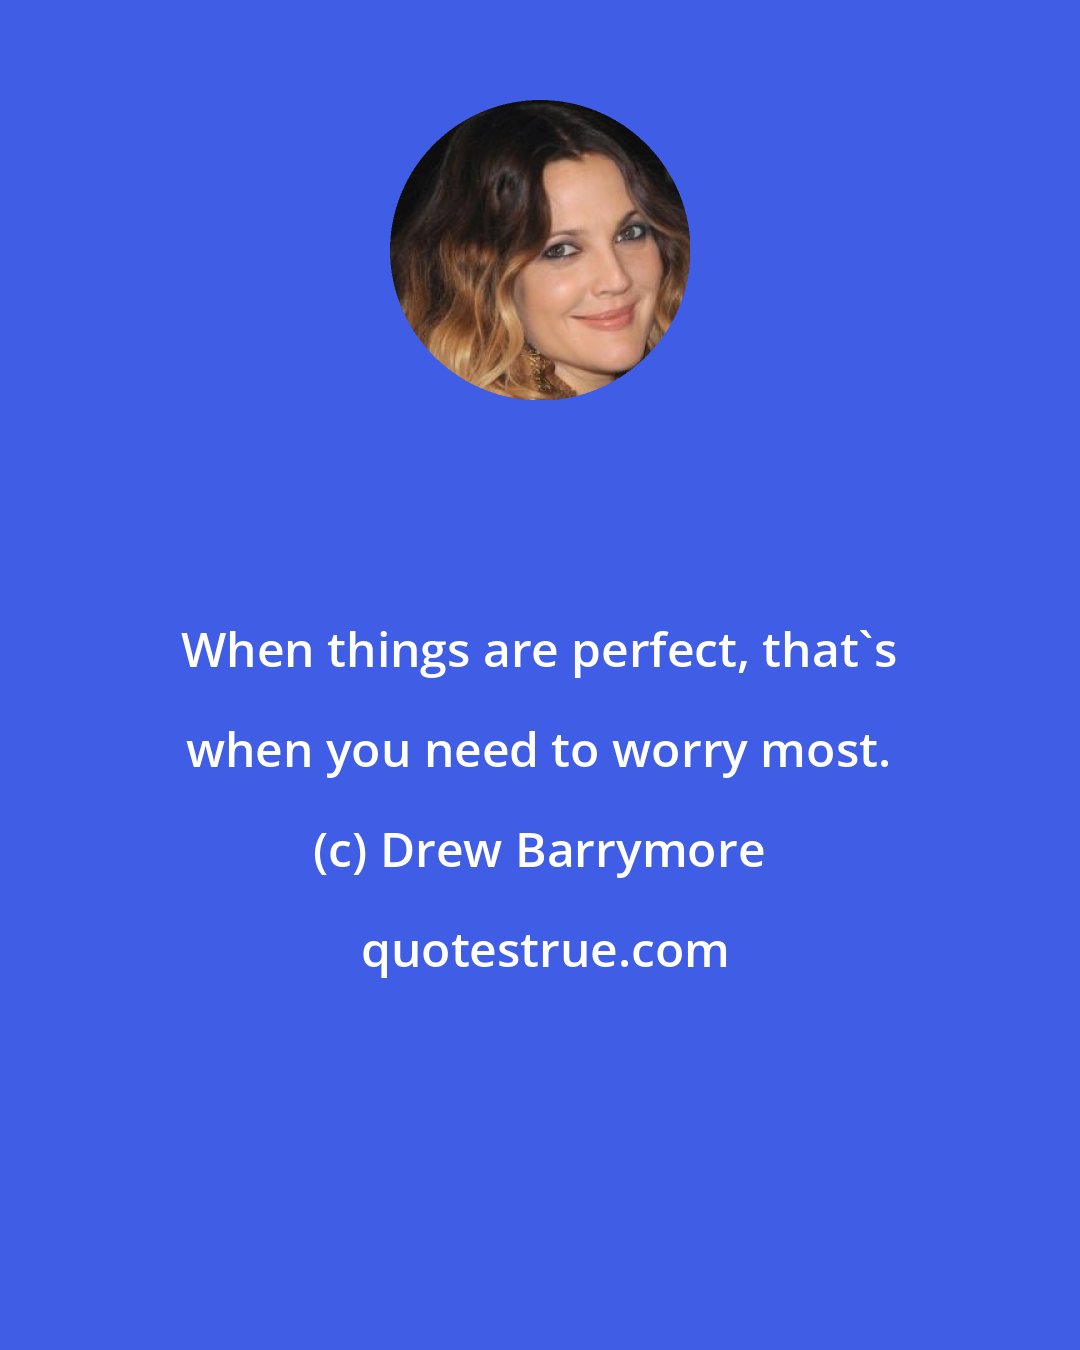 Drew Barrymore: When things are perfect, that's when you need to worry most.